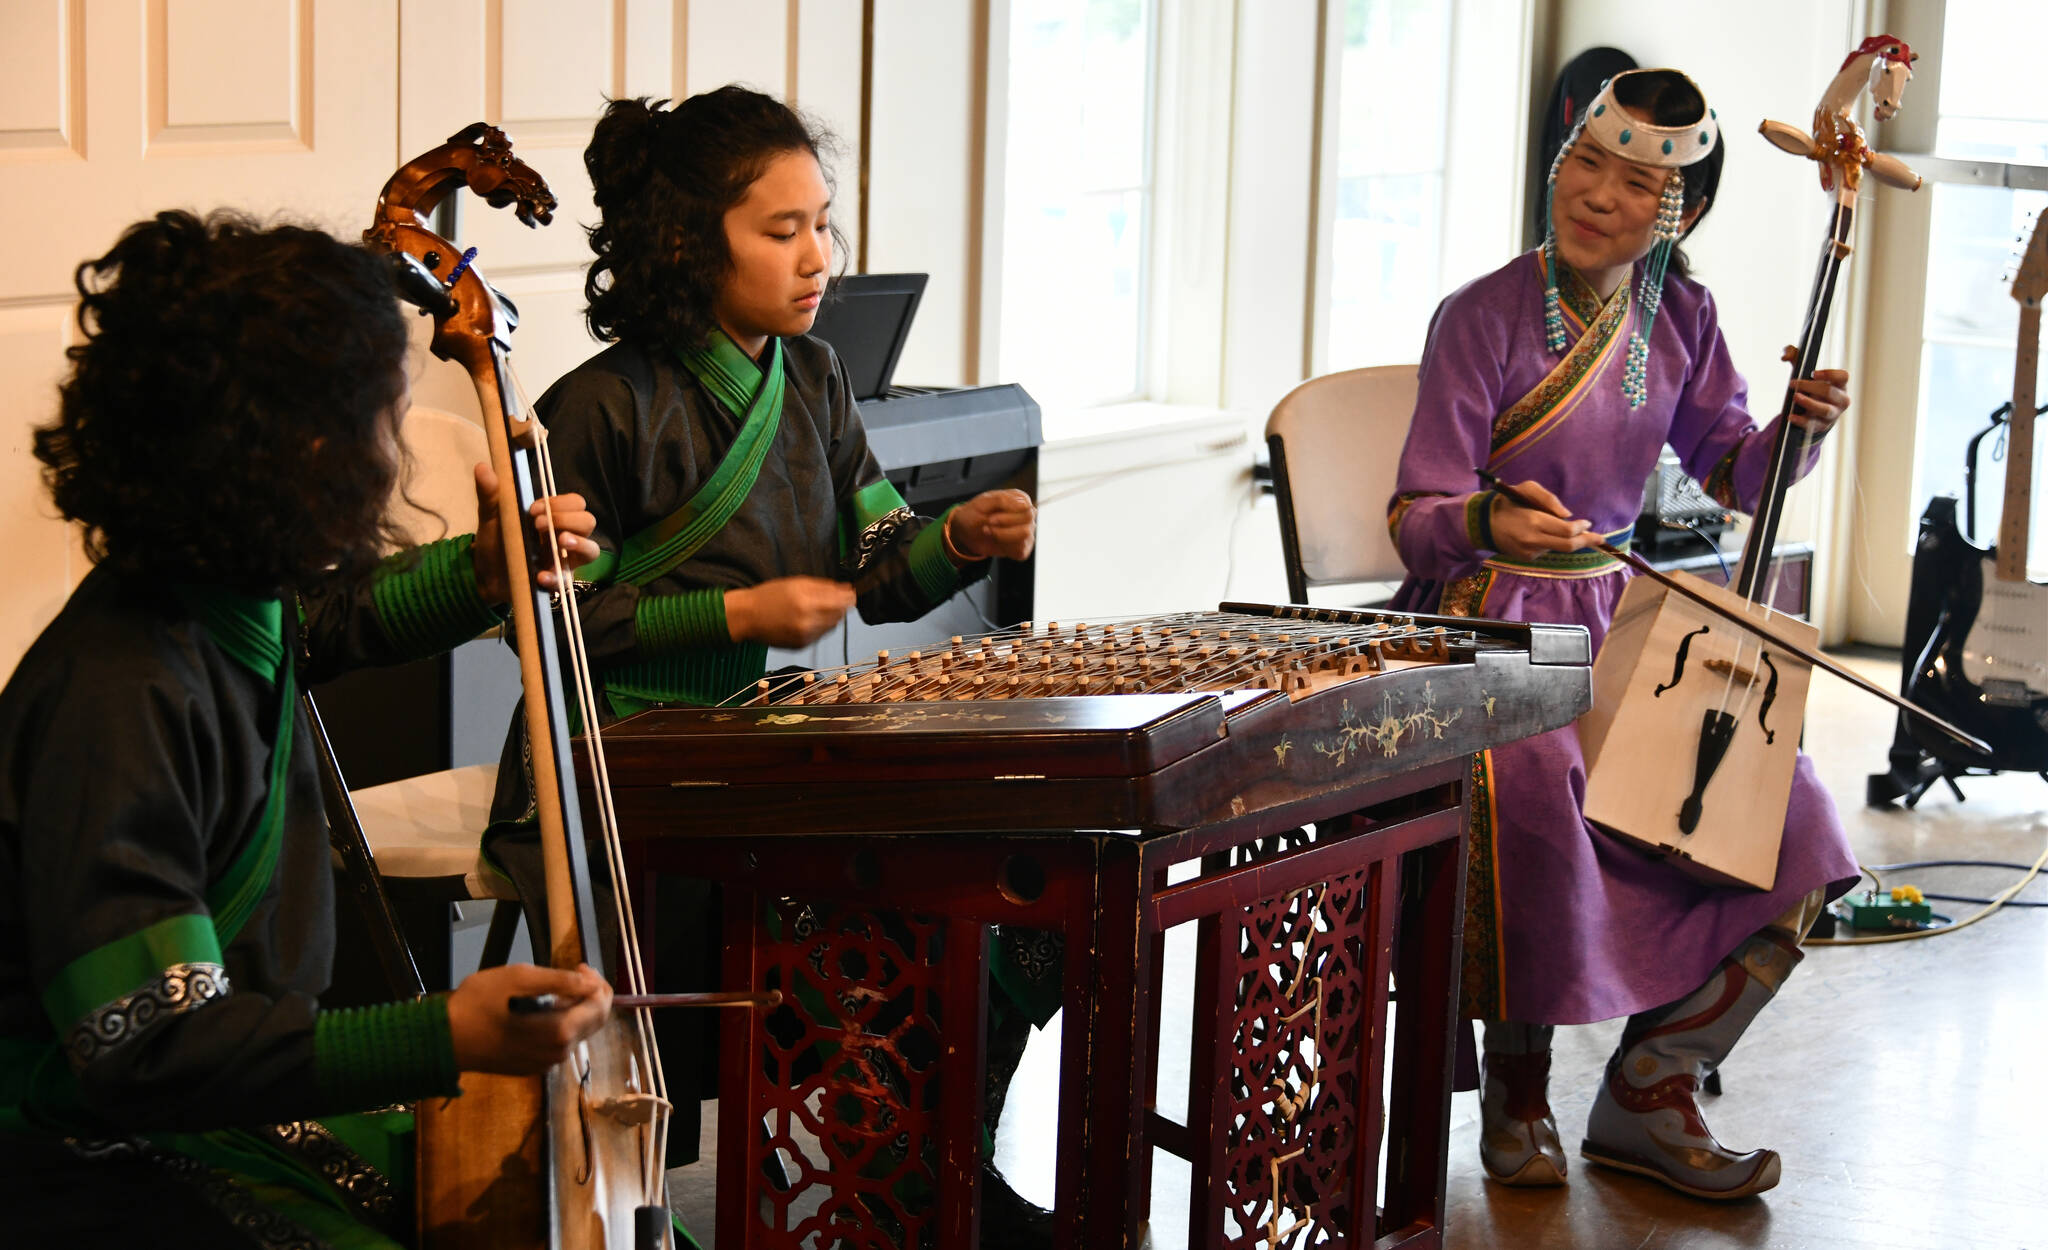 The Mercer Island-based ZJE Mongolian Music Ensemble — Temuujin, Temuulen and Anu-Ujin Batbaatar — perform a traditional Mongolian tune at the recent AANHPI (Asian American, Native Hawaiian and Pacific Islander) student showcase at the Newport Yacht Club in Bellevue. ZJE will perform a free concert from 7-8 p.m. on July 21 at the Old Fire House Teen Center, 16510 NE 79th St., Redmond. “Immerse yourself in the vibrant sounds of traditional Mongolian music, where captivating rhythms and soul-stirring vocals will transport you to a world of cultural richness,” reads a press release. Seats are limited. Andy Nystrom/ staff photo